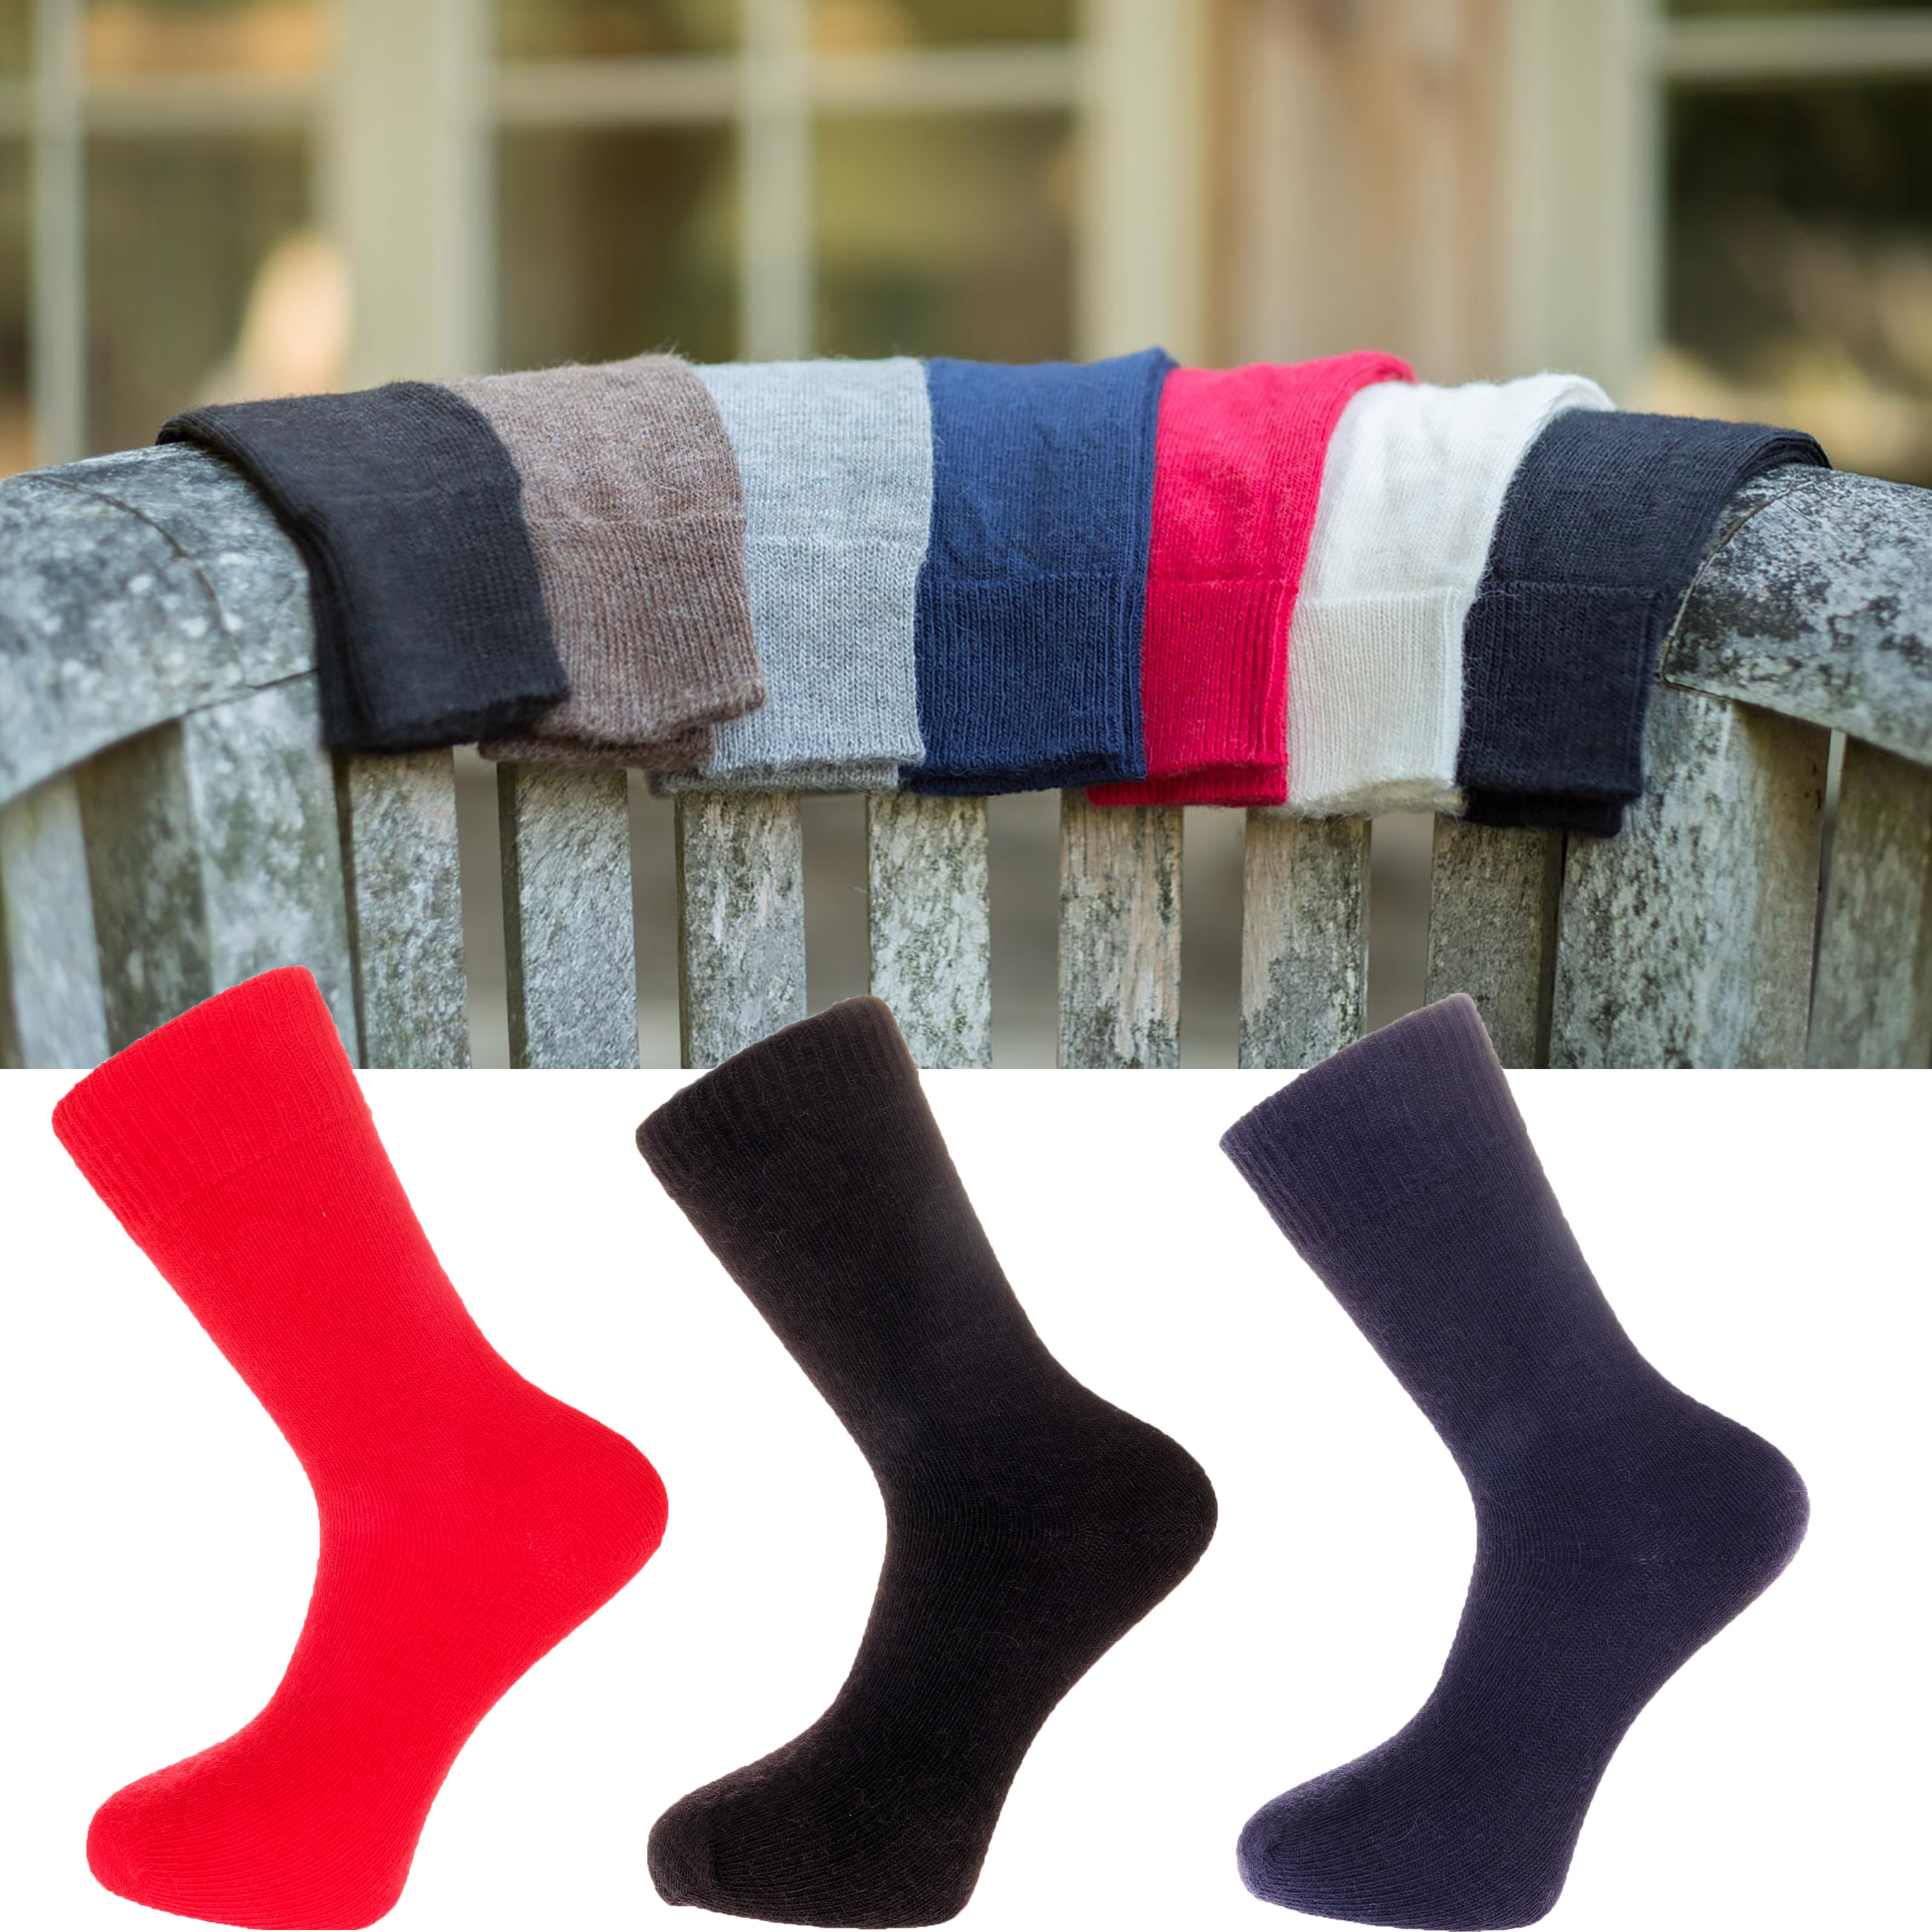 The Alpaca Every Day Socks in 3 colours